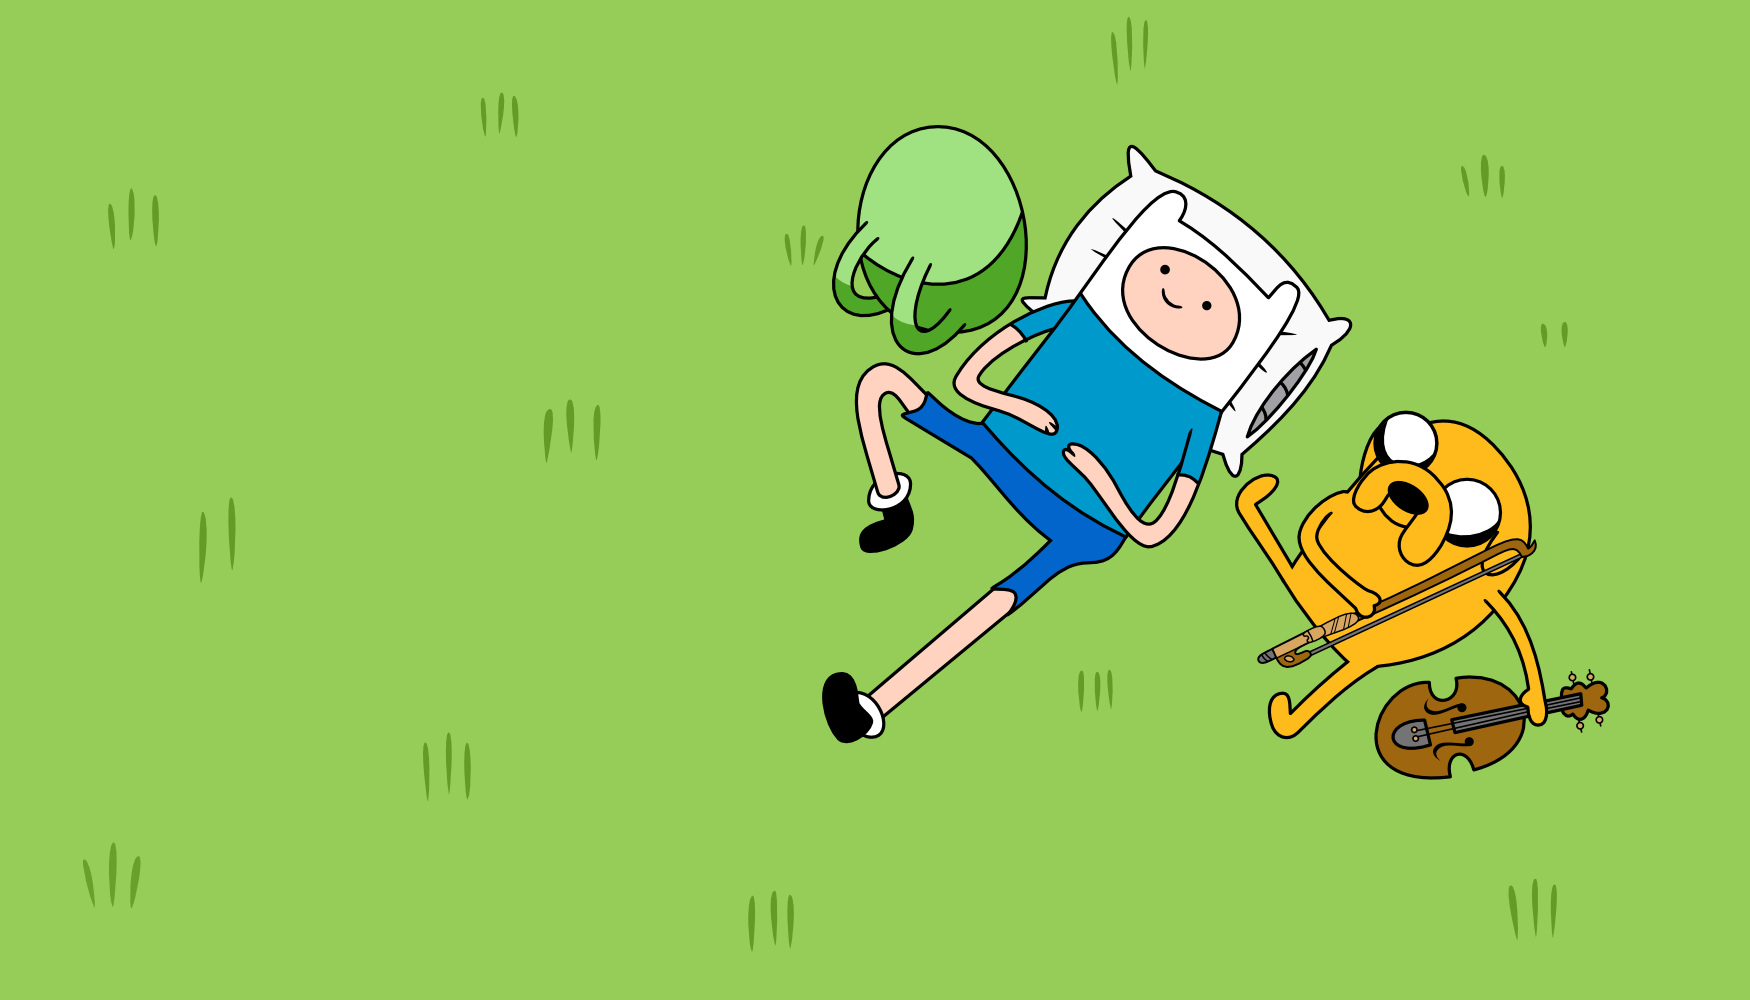 Jake Listening To Music In The Rain Adventure Time Live Wallpaper - MoeWalls